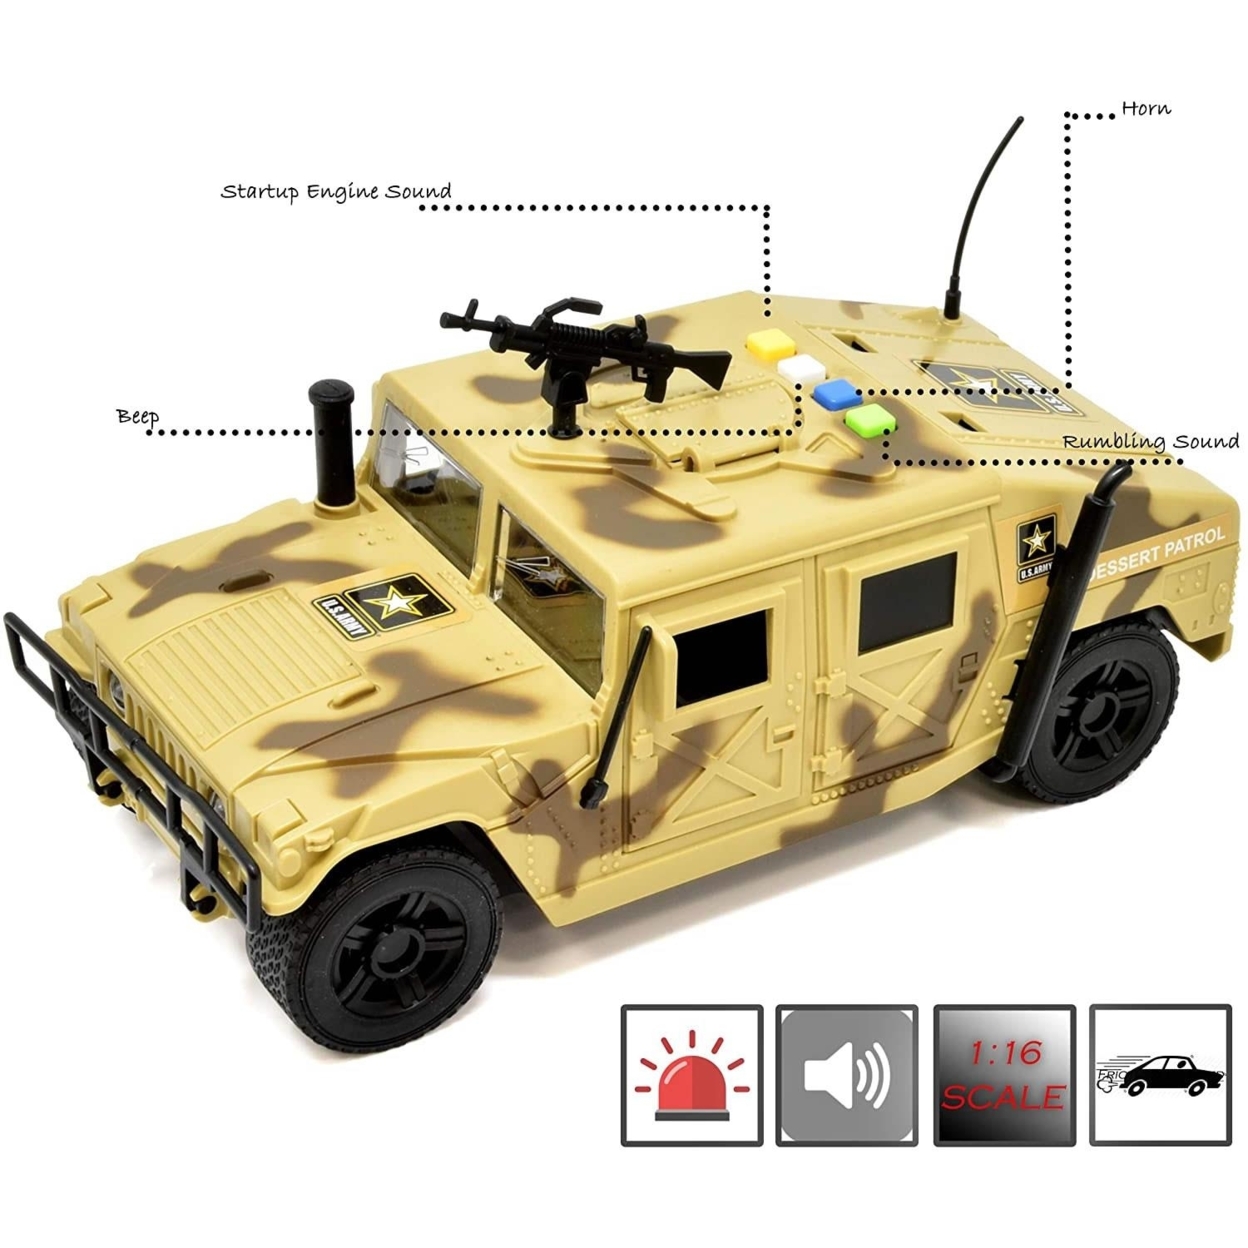 United States Army Desert Patrol Vehicle Lights Sounds Military Truck US